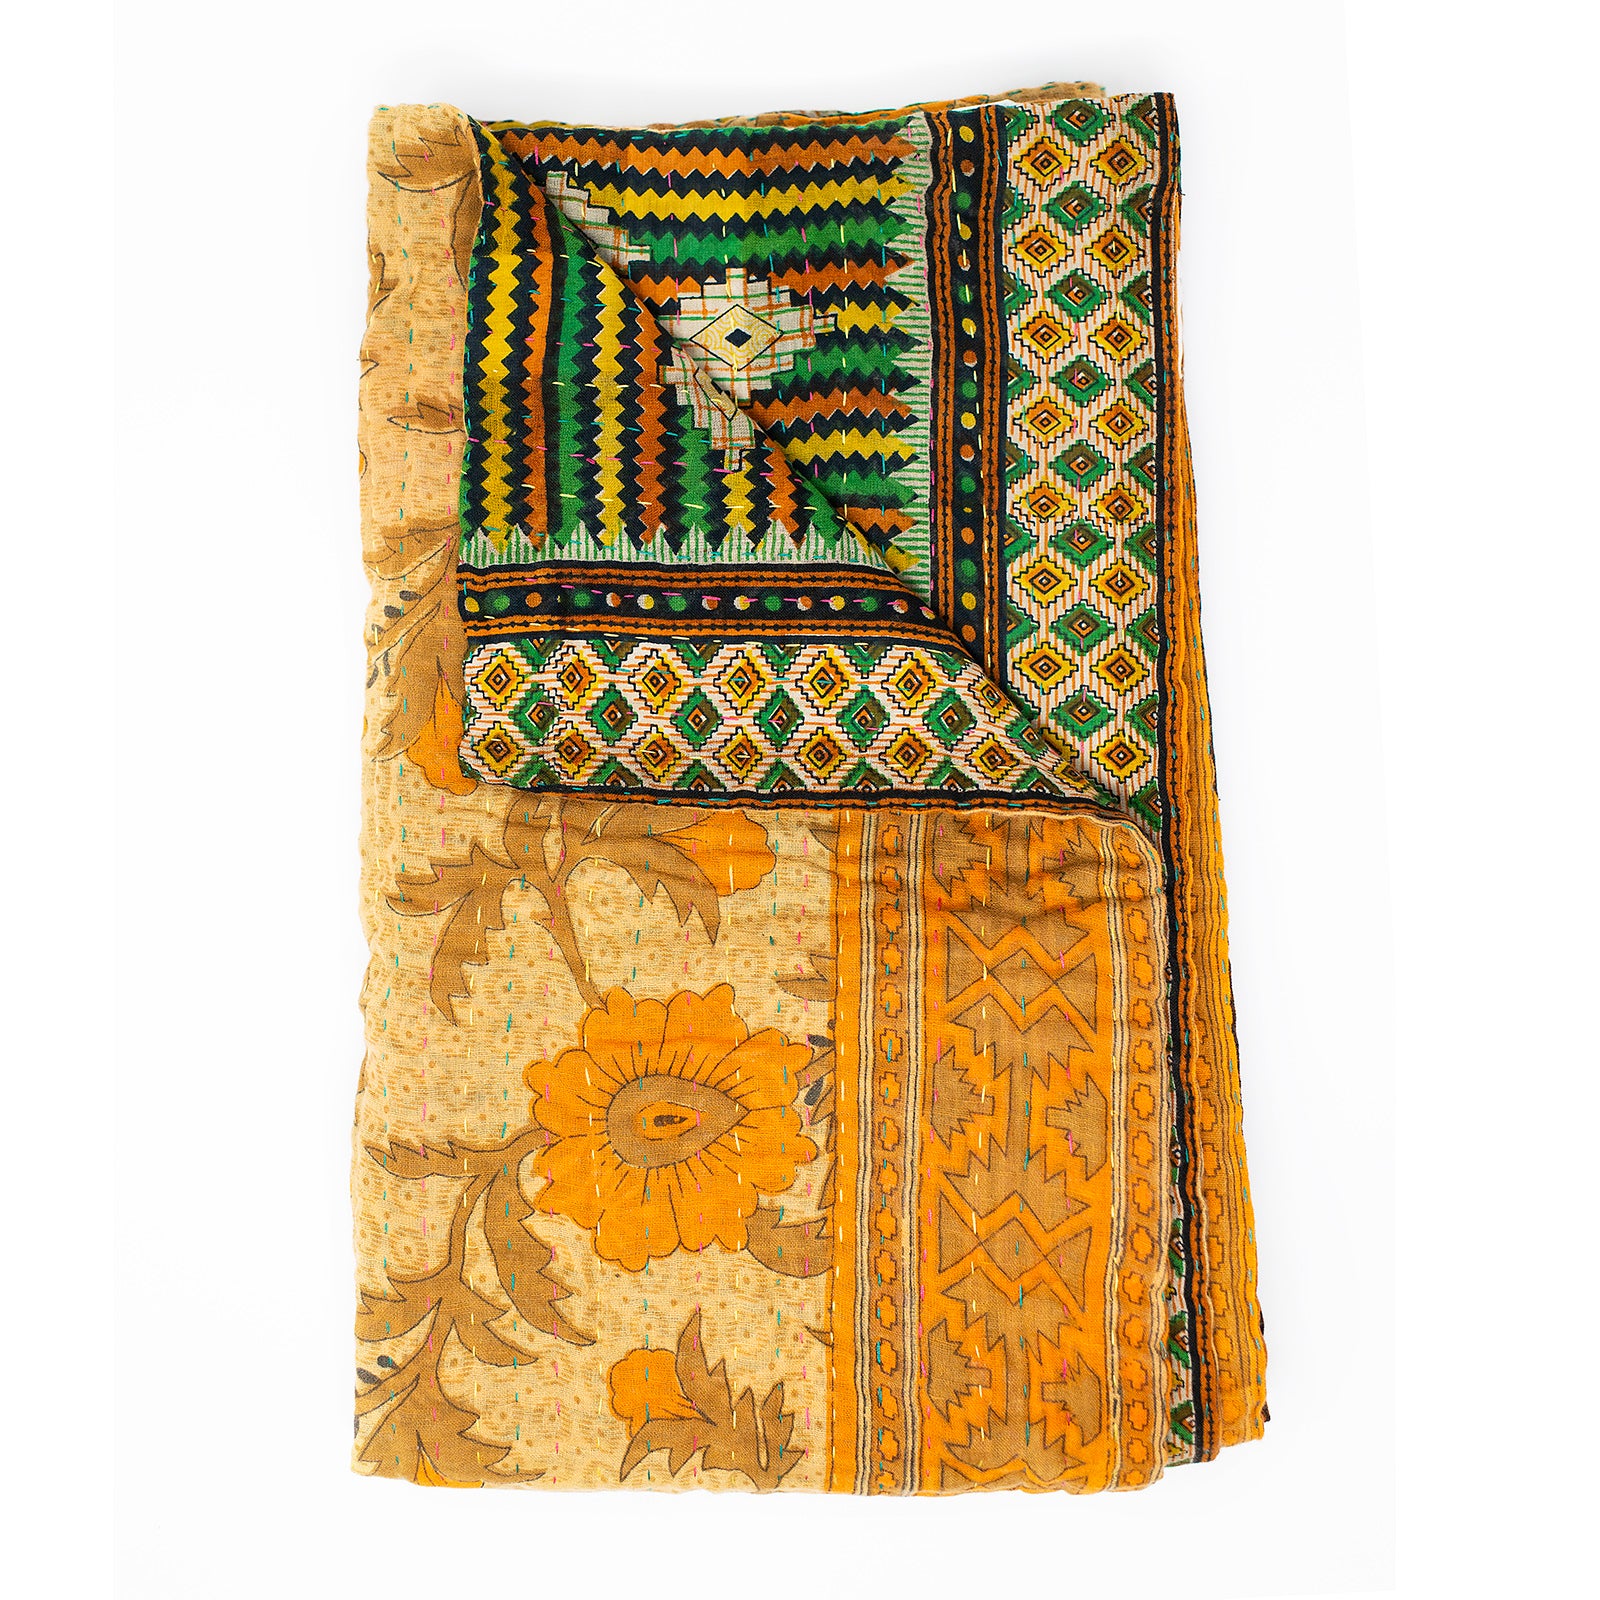 The Bohemian Collective - Waldorf & Montessori Toys, Kantha Quilts